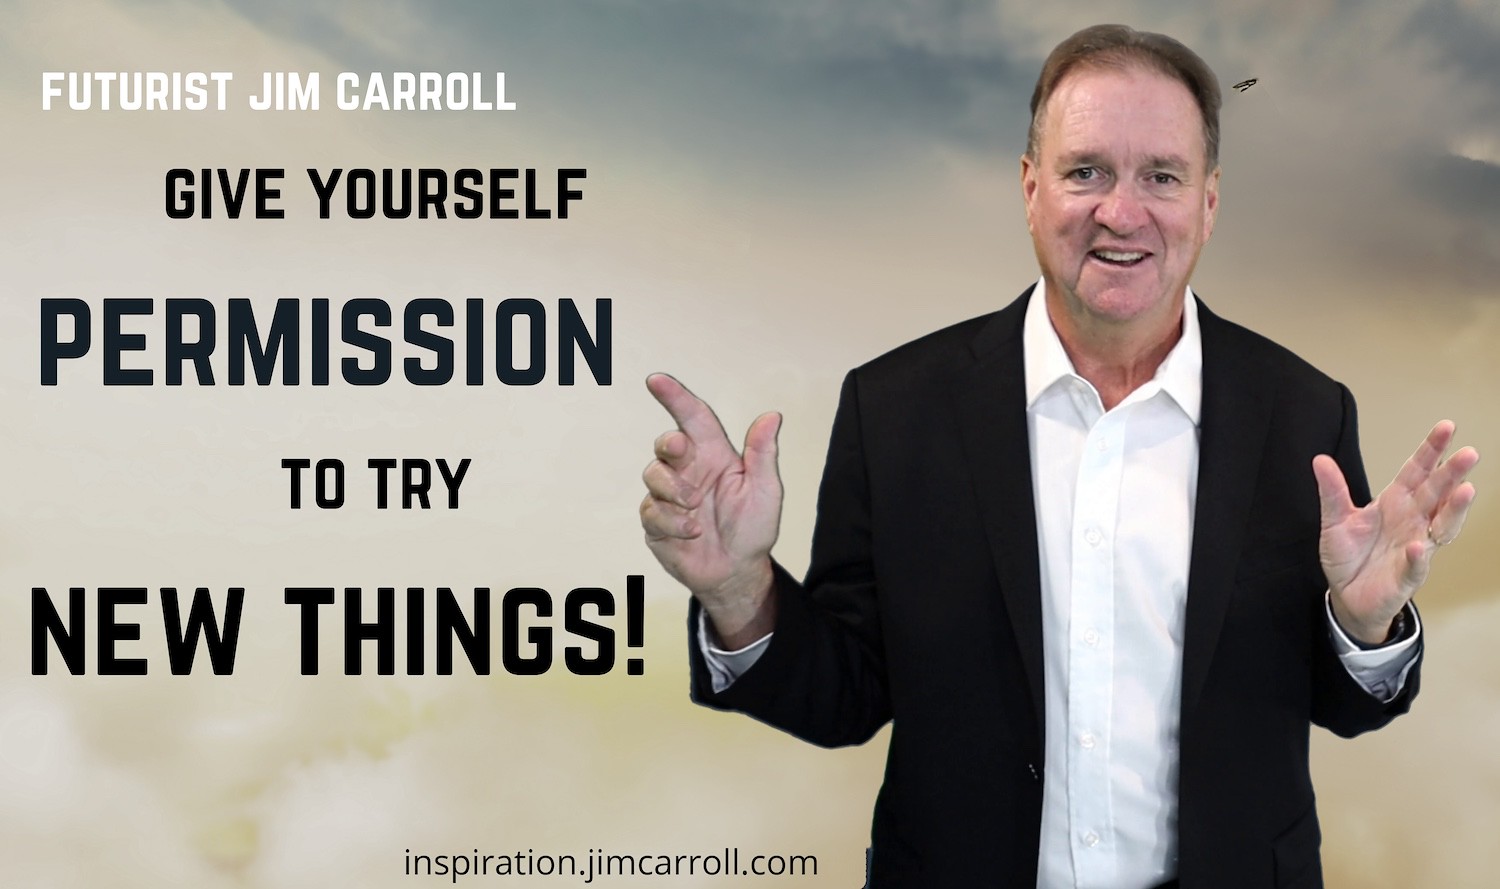 "Give yourself permission to try new things!" - Futurist Jim Carroll